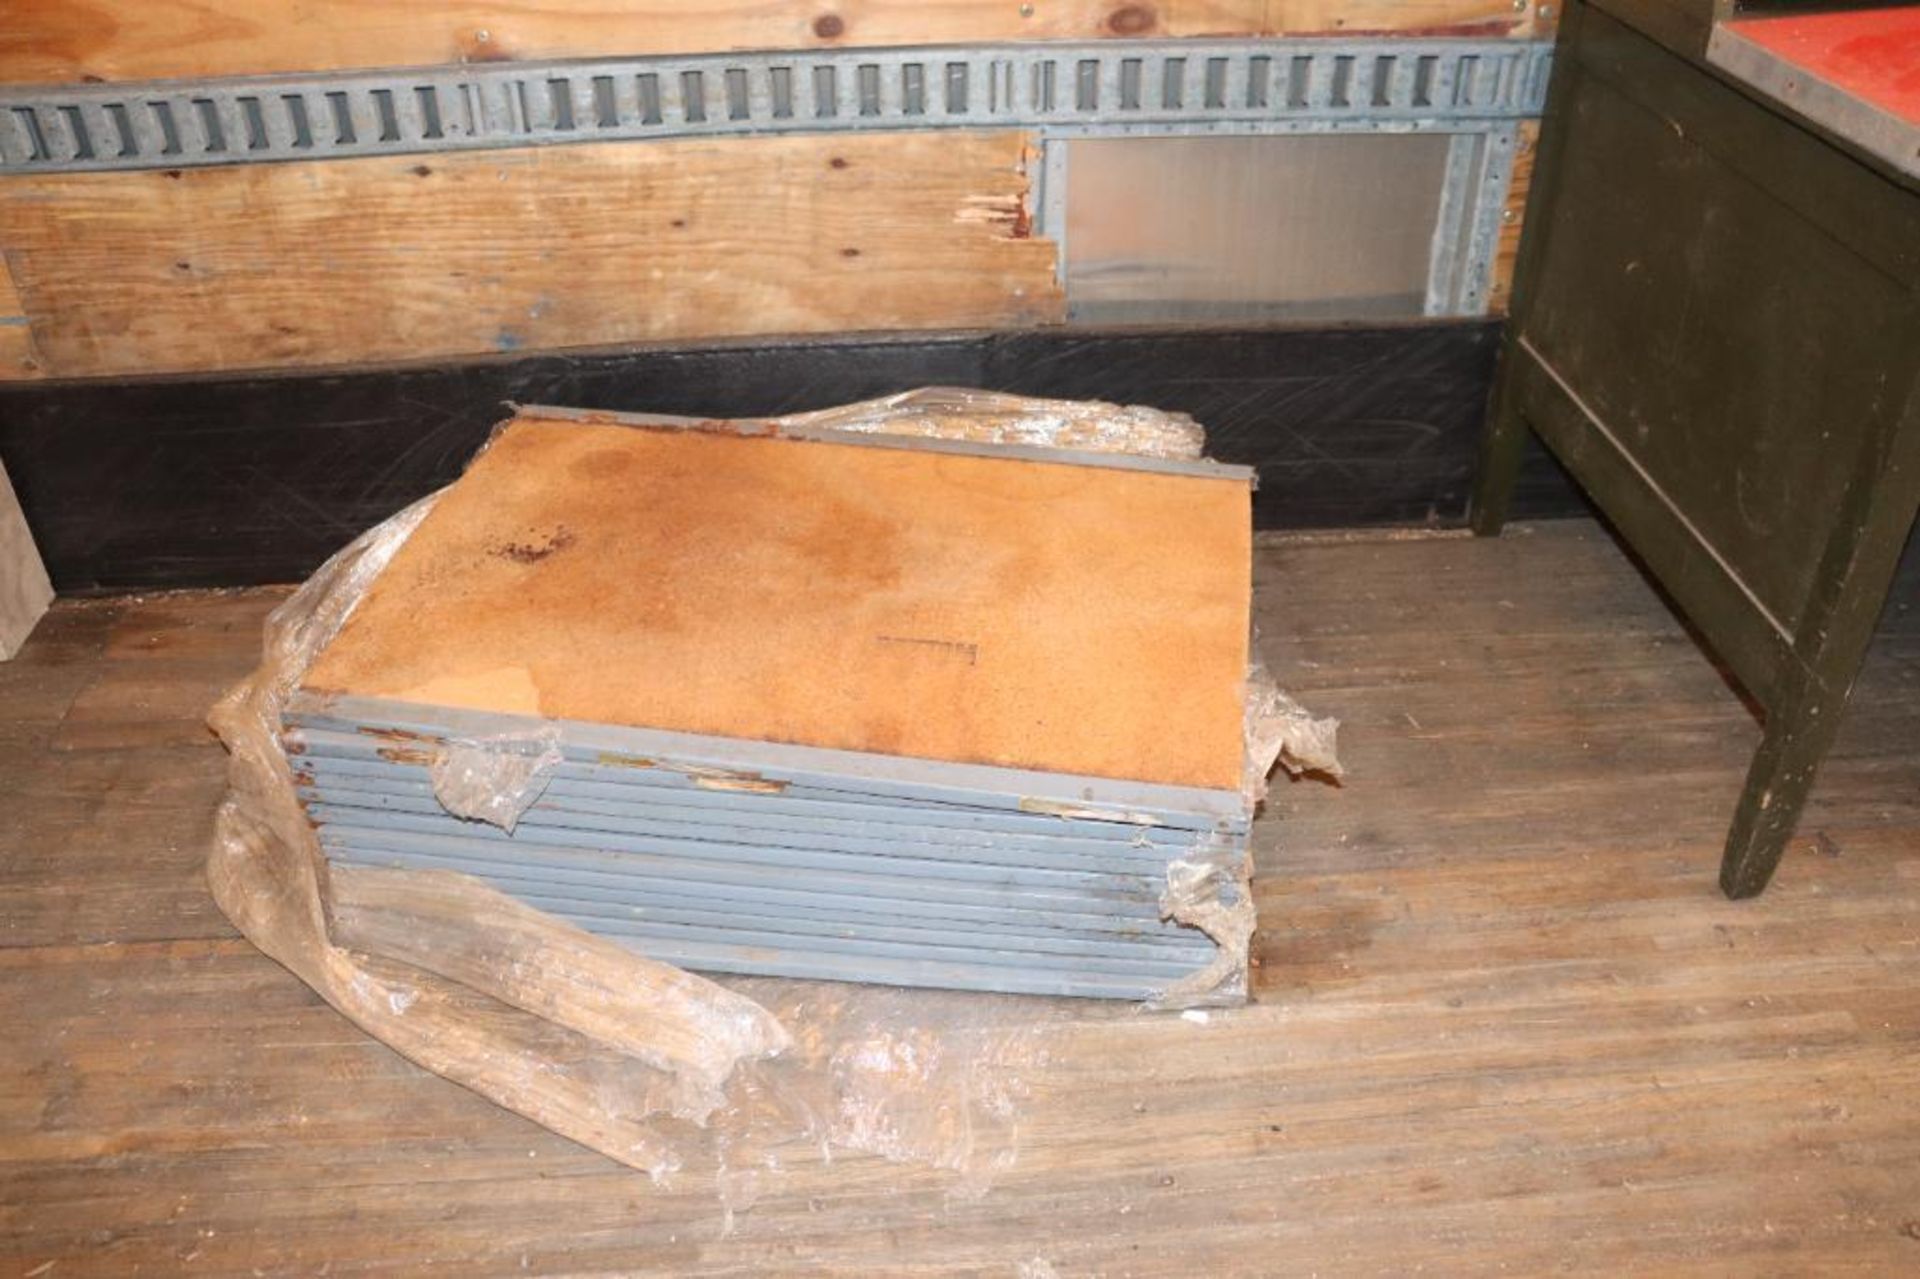 Contents of semi trailer - Image 45 of 77